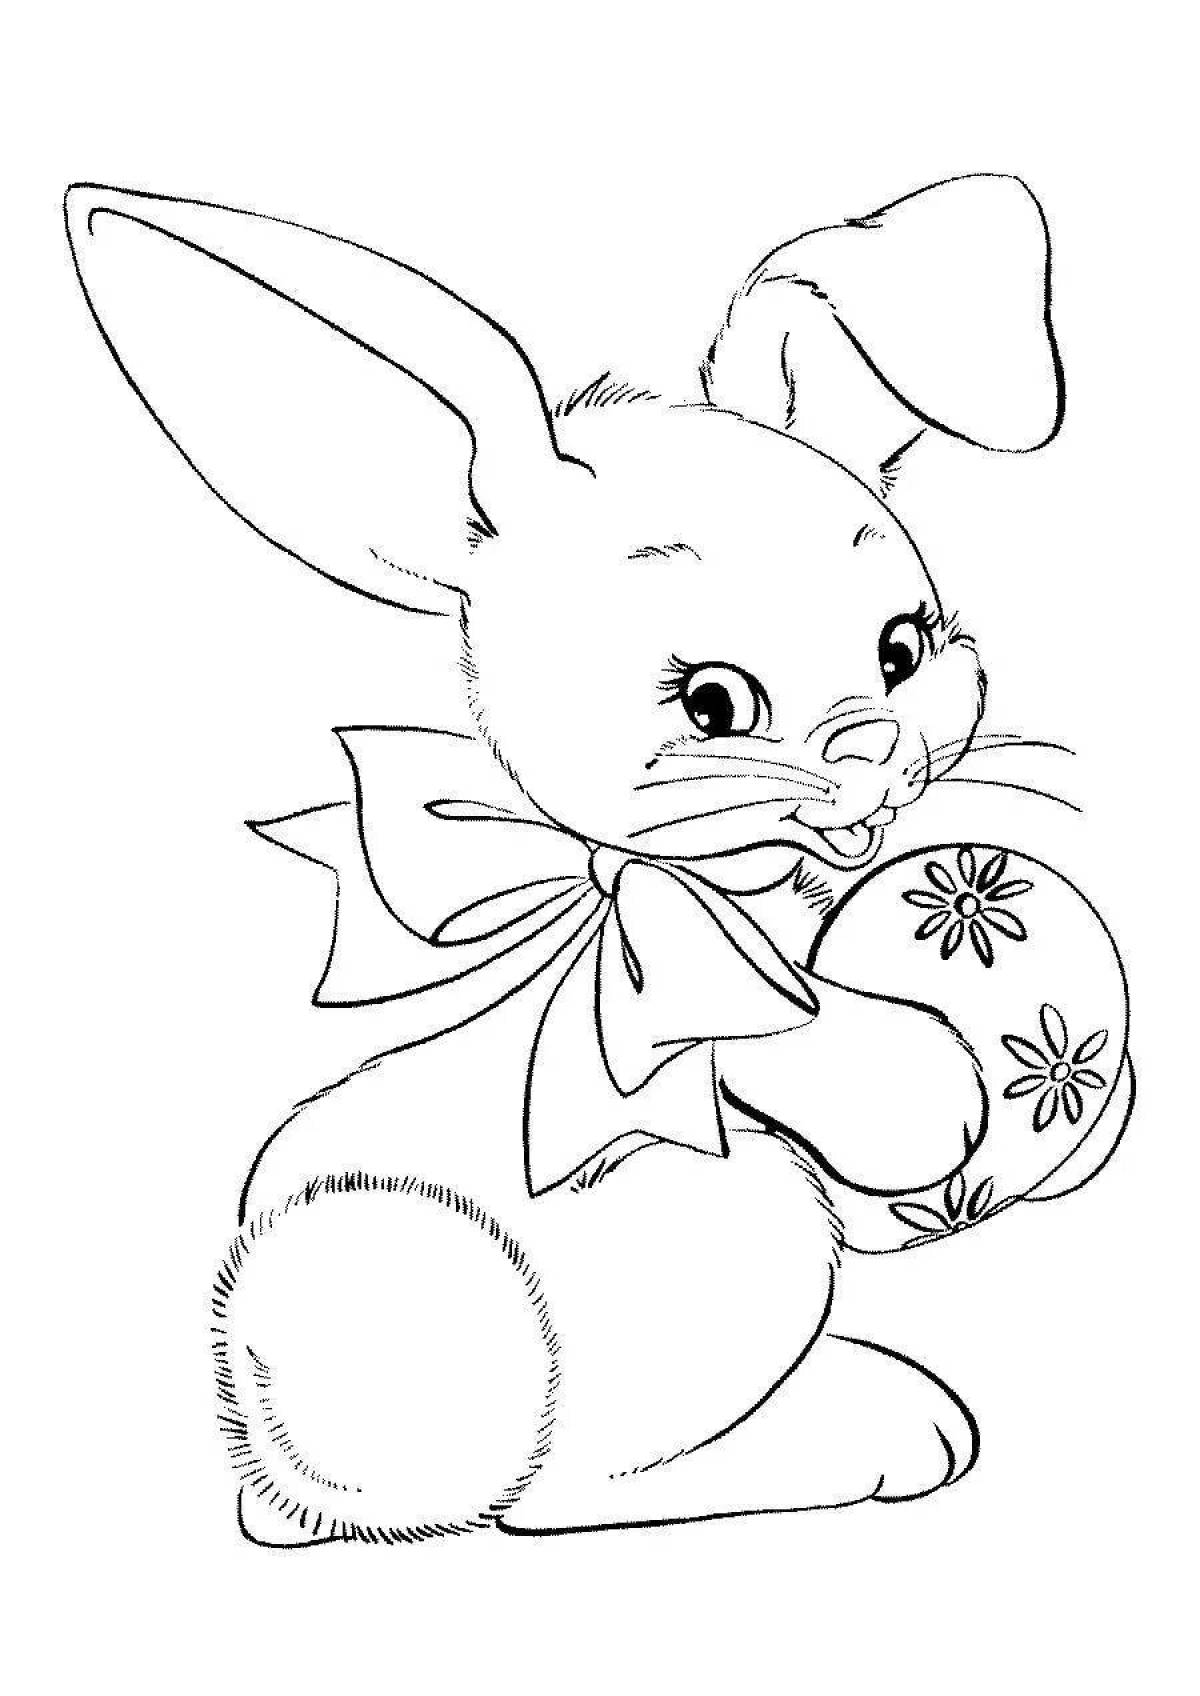 Fabulous year of the hare coloring page